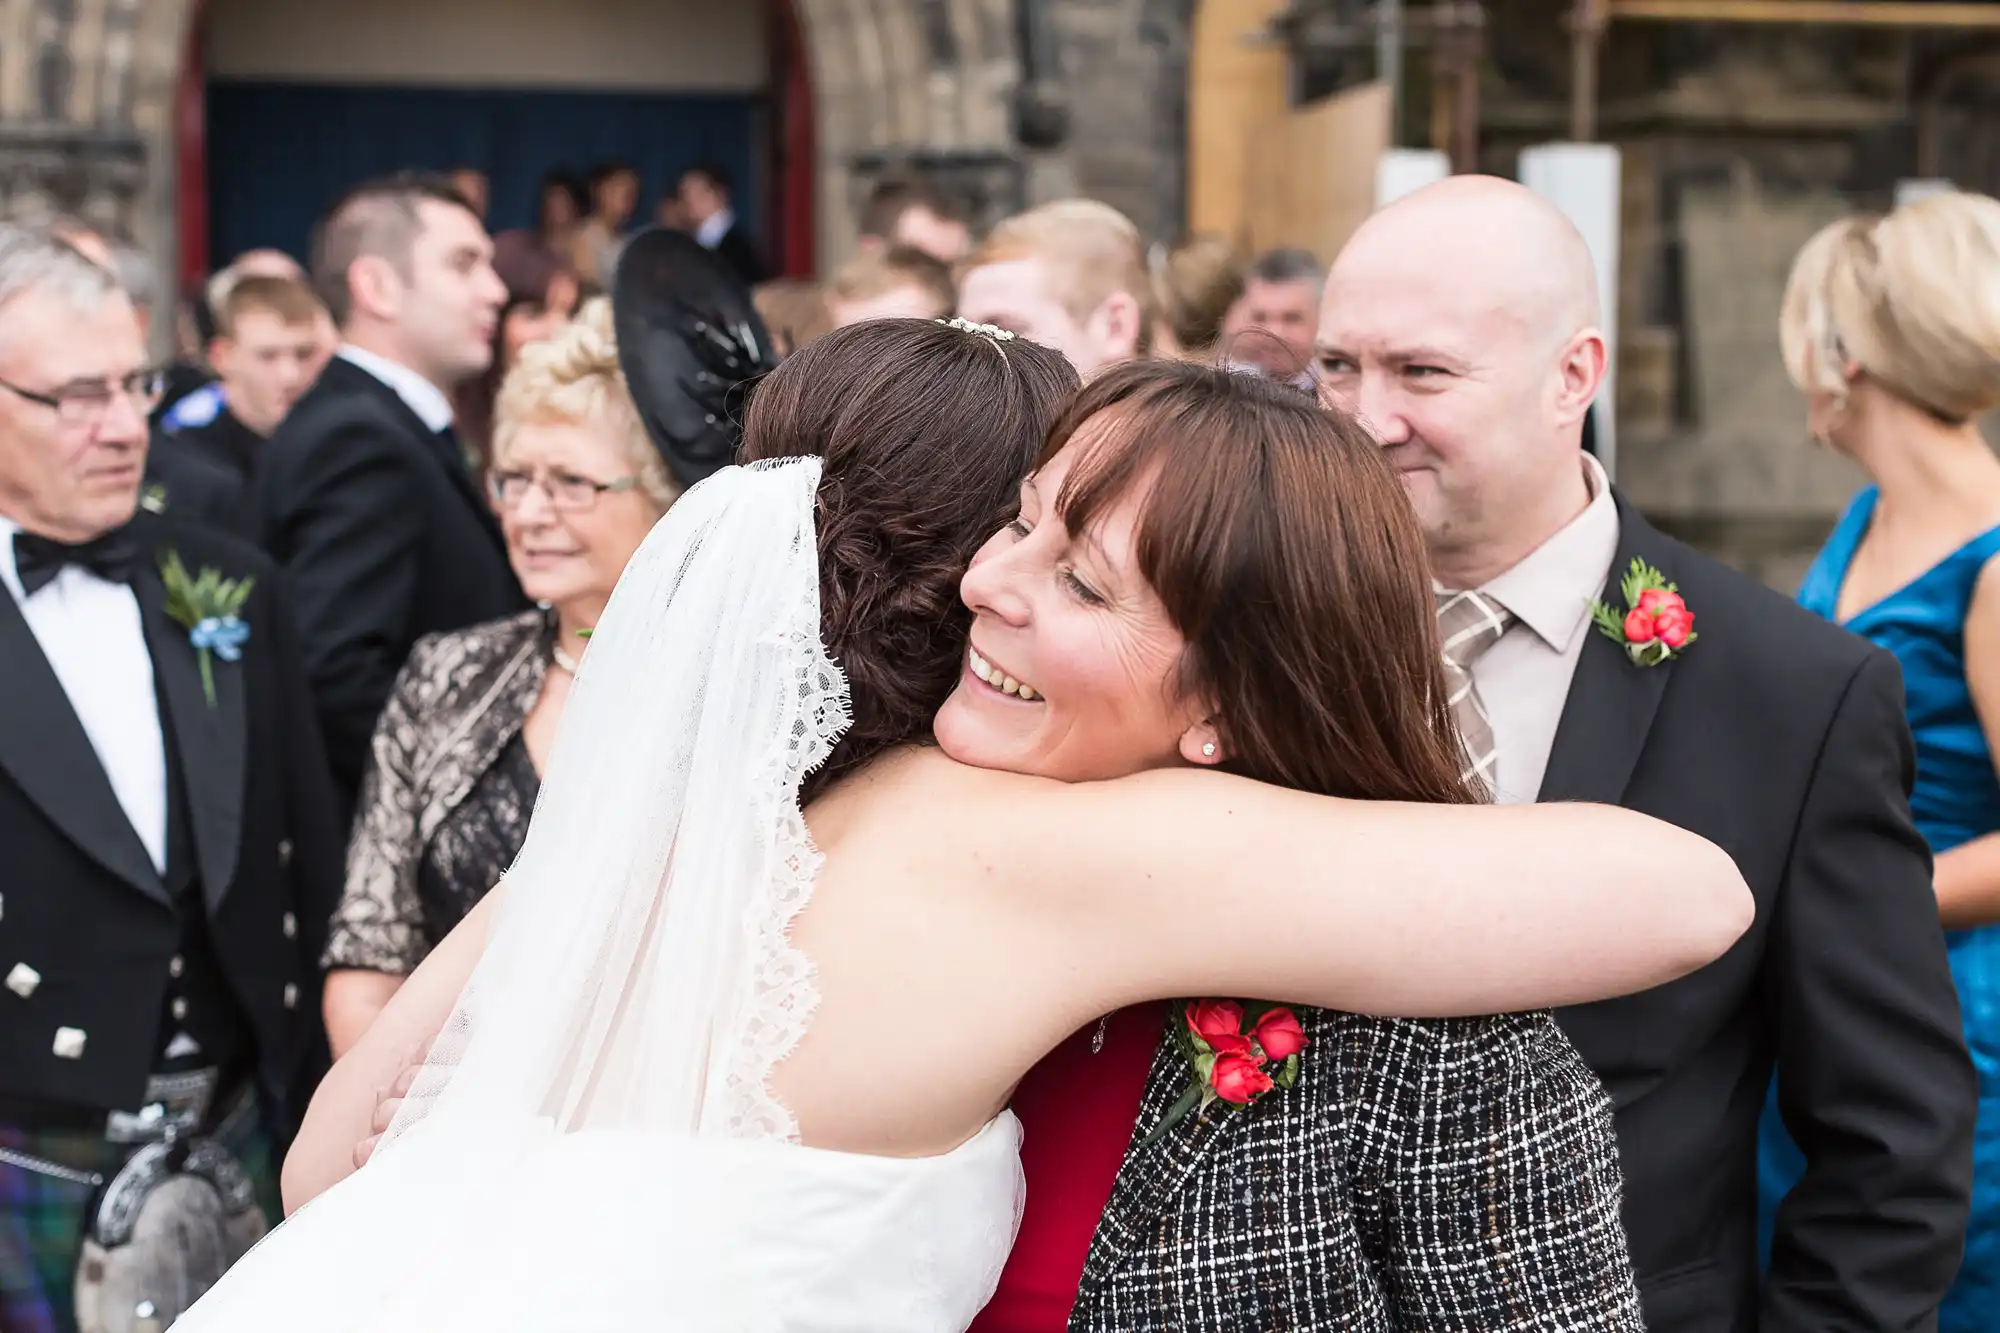 A bride in a white dress hugging a woman in a black dress at a wedding, with guests in the background, including a man in a kilt.